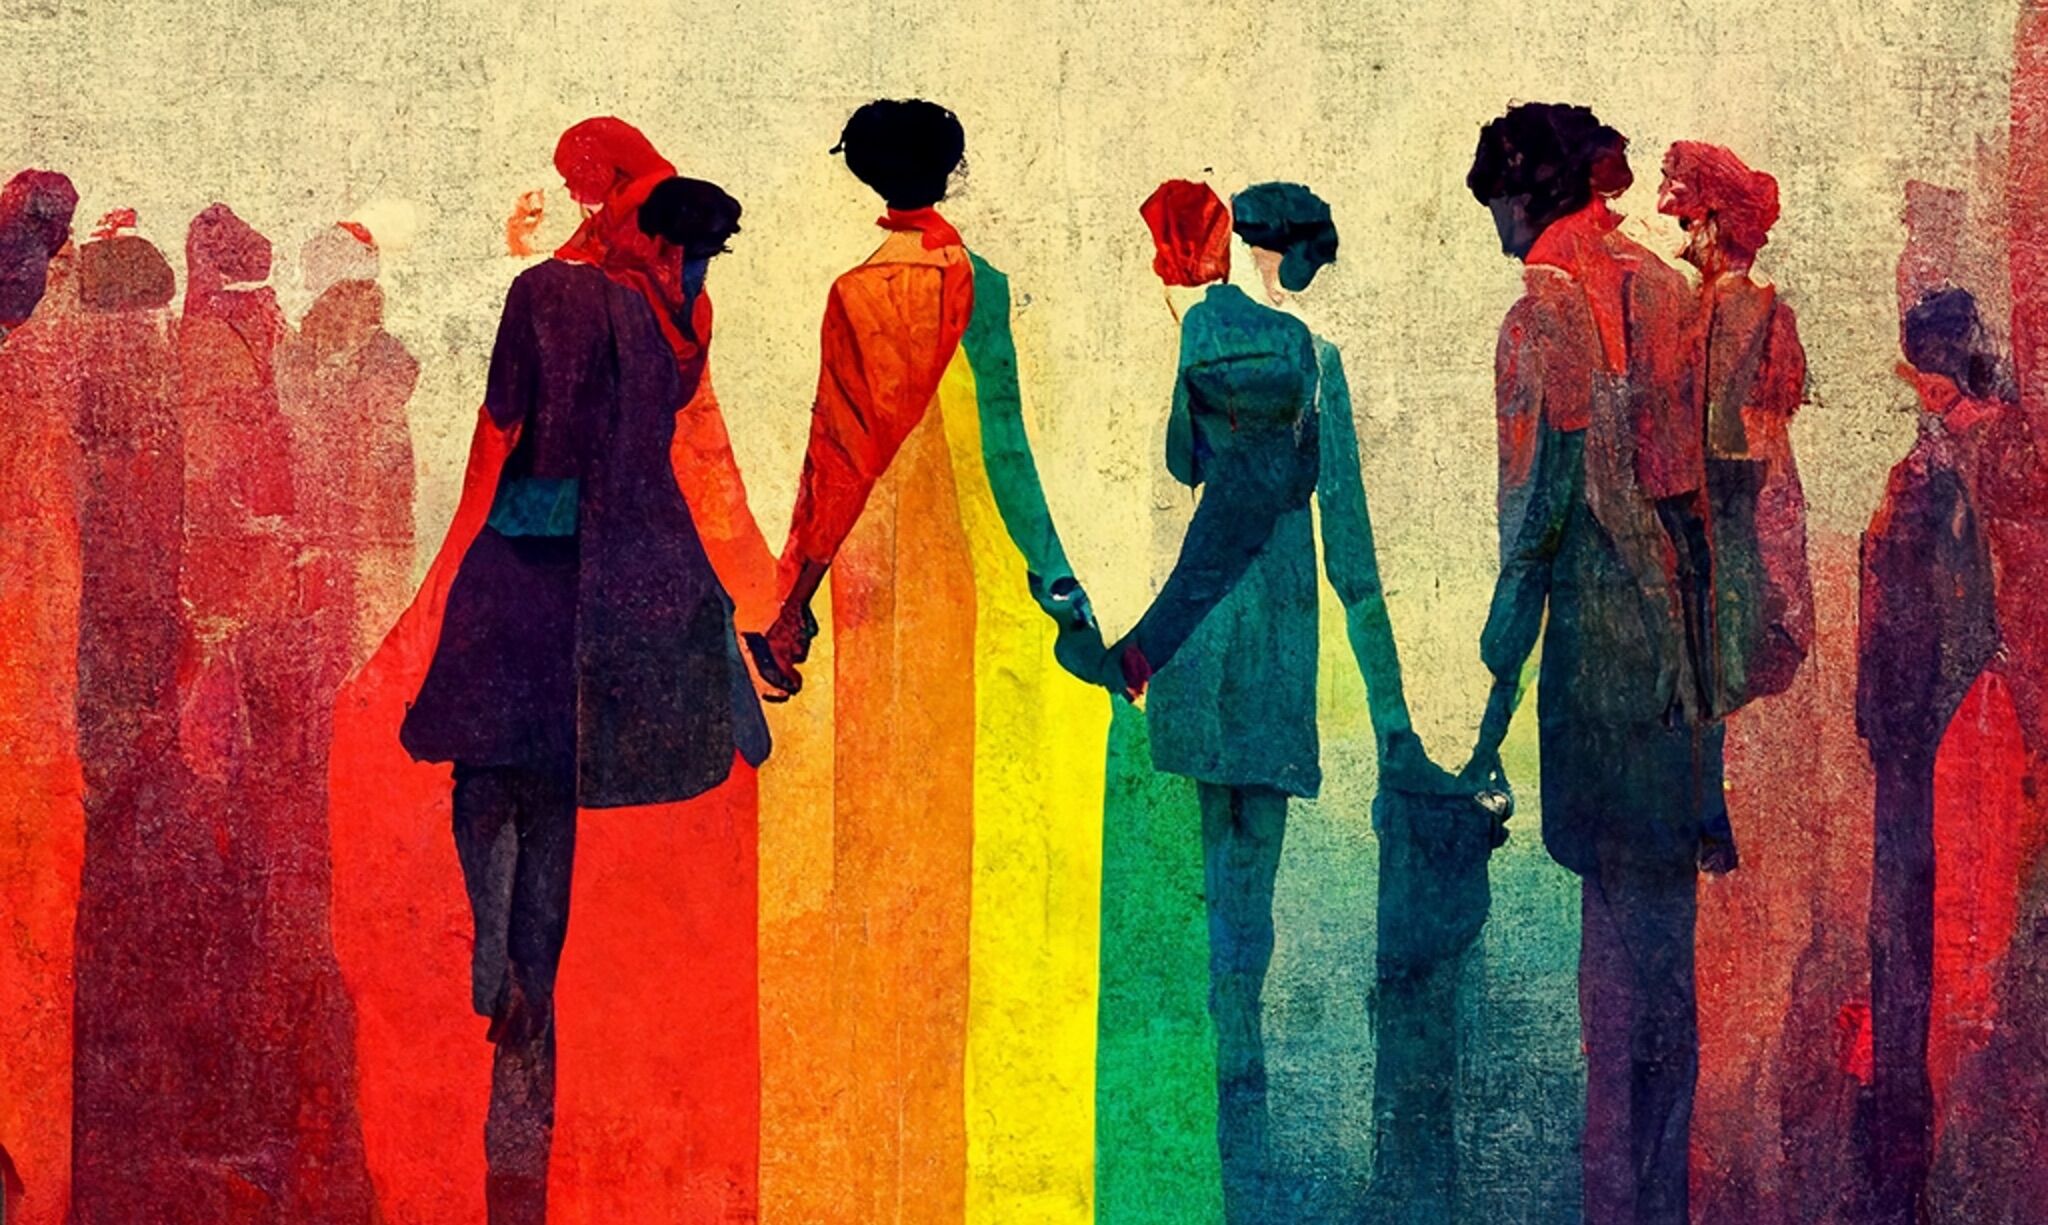 Abstract LGBTQ+ illustration, people holding hands, gathering together with gaypride colors, diverity, inclusion, love, gender, homosexuality.Painting, concept art, illustration, wallpaper